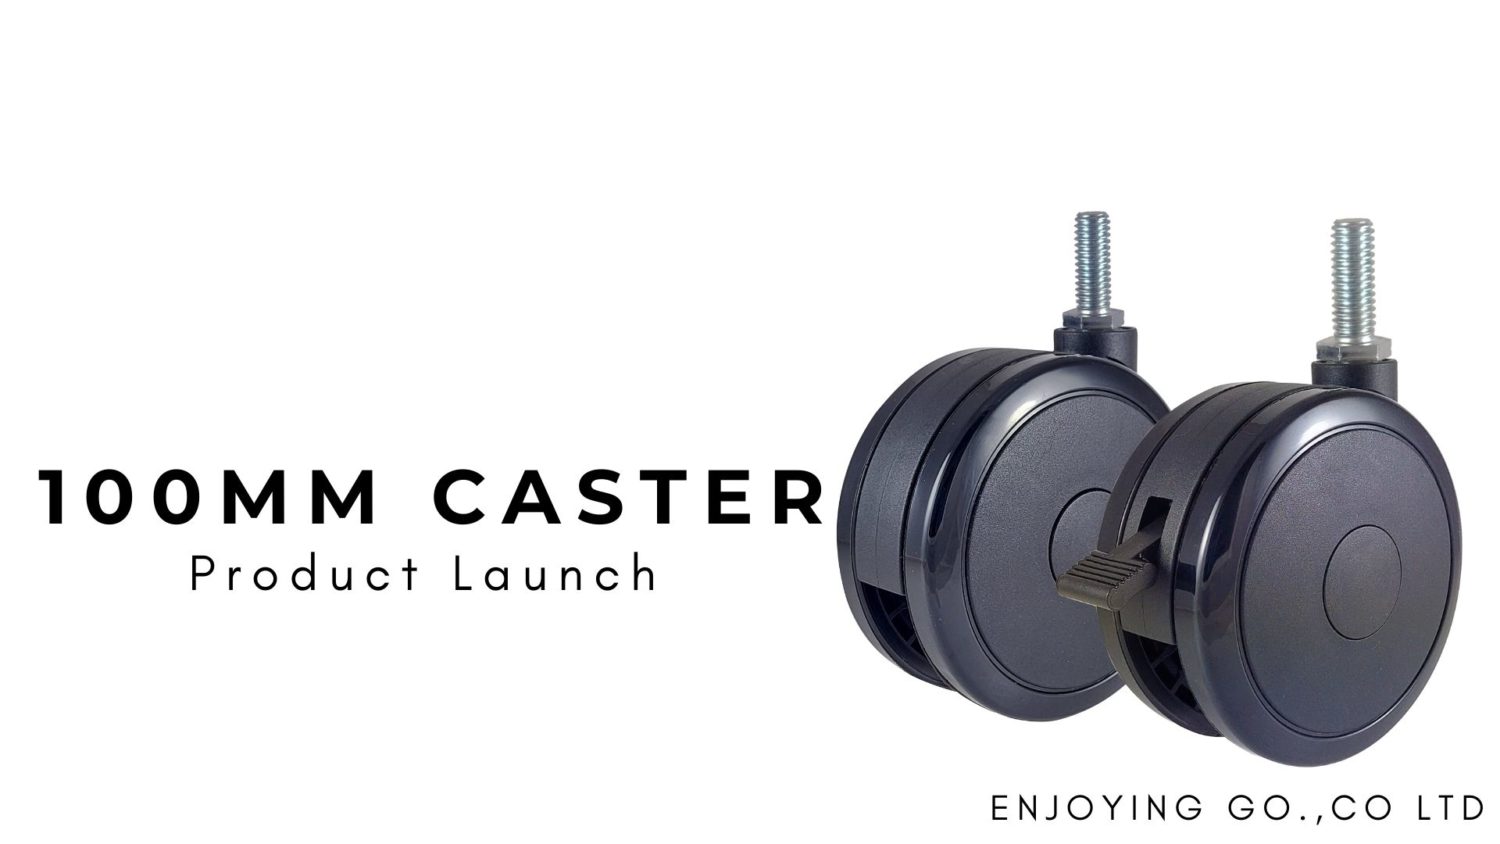 100mm new caster launched: A new heavy-duty caster wheel addition in our catalog